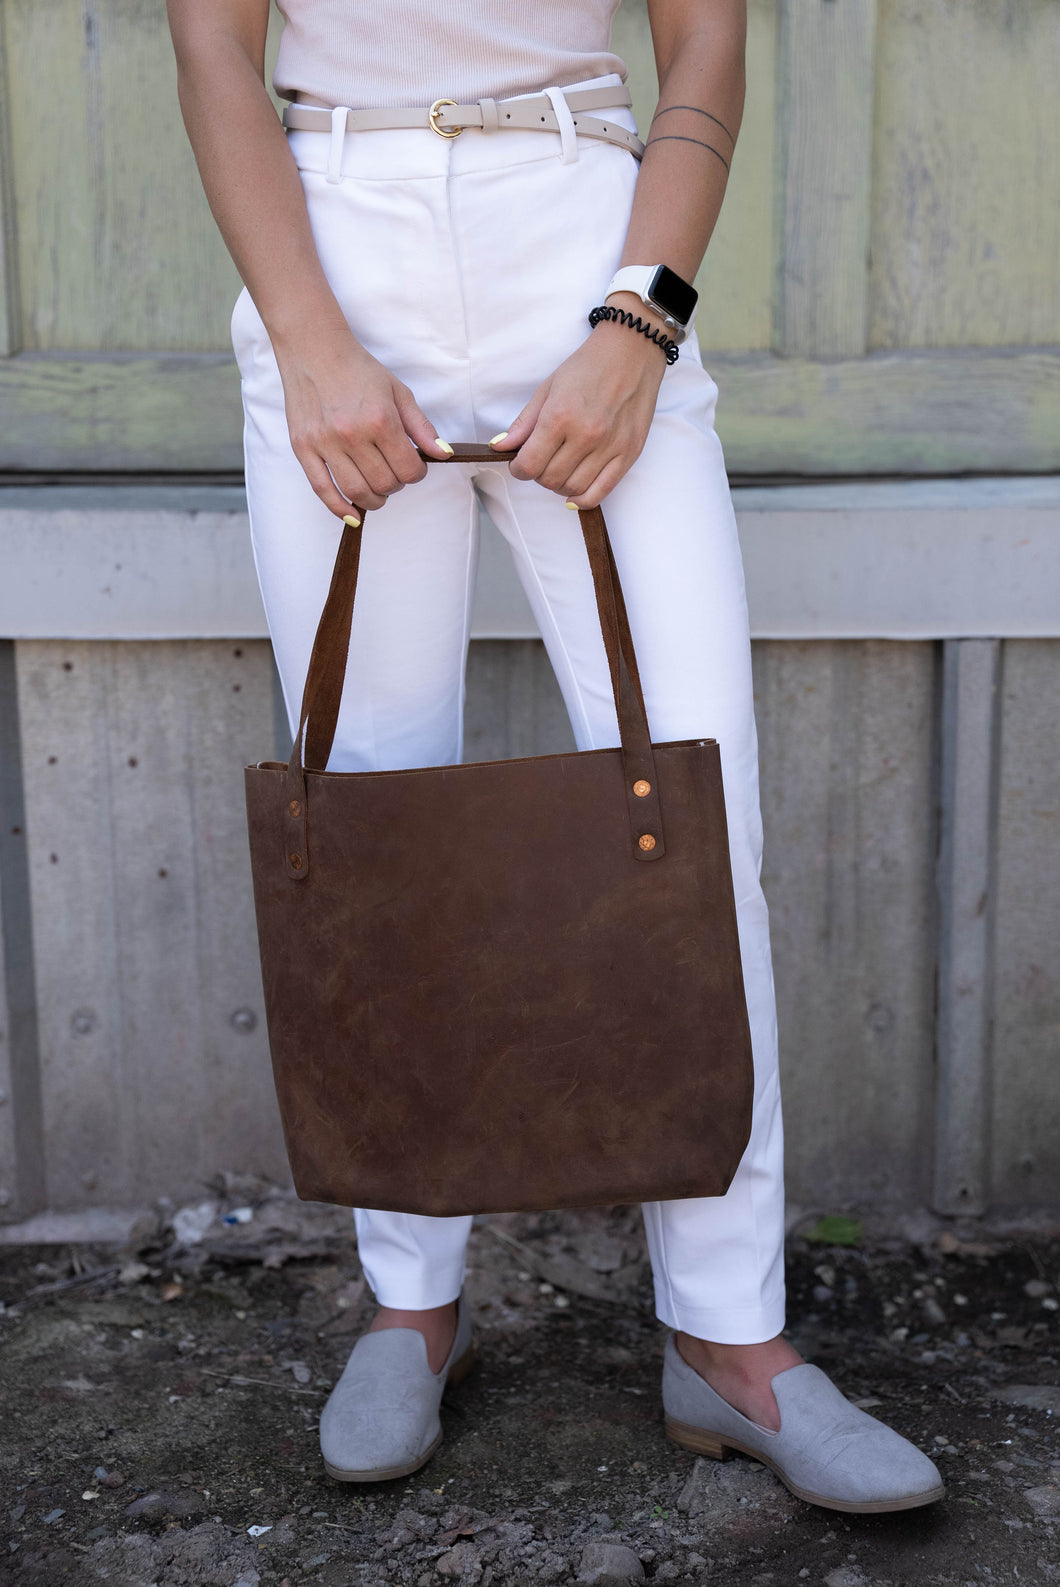 Missoula, Montana Chrome Tote bag for sale. Made with local leather and handmade by Snowday leather. The leather purse is fashioned by premium white pants, white smart watch and elegant off white skinny belt by a Missoula local woman.